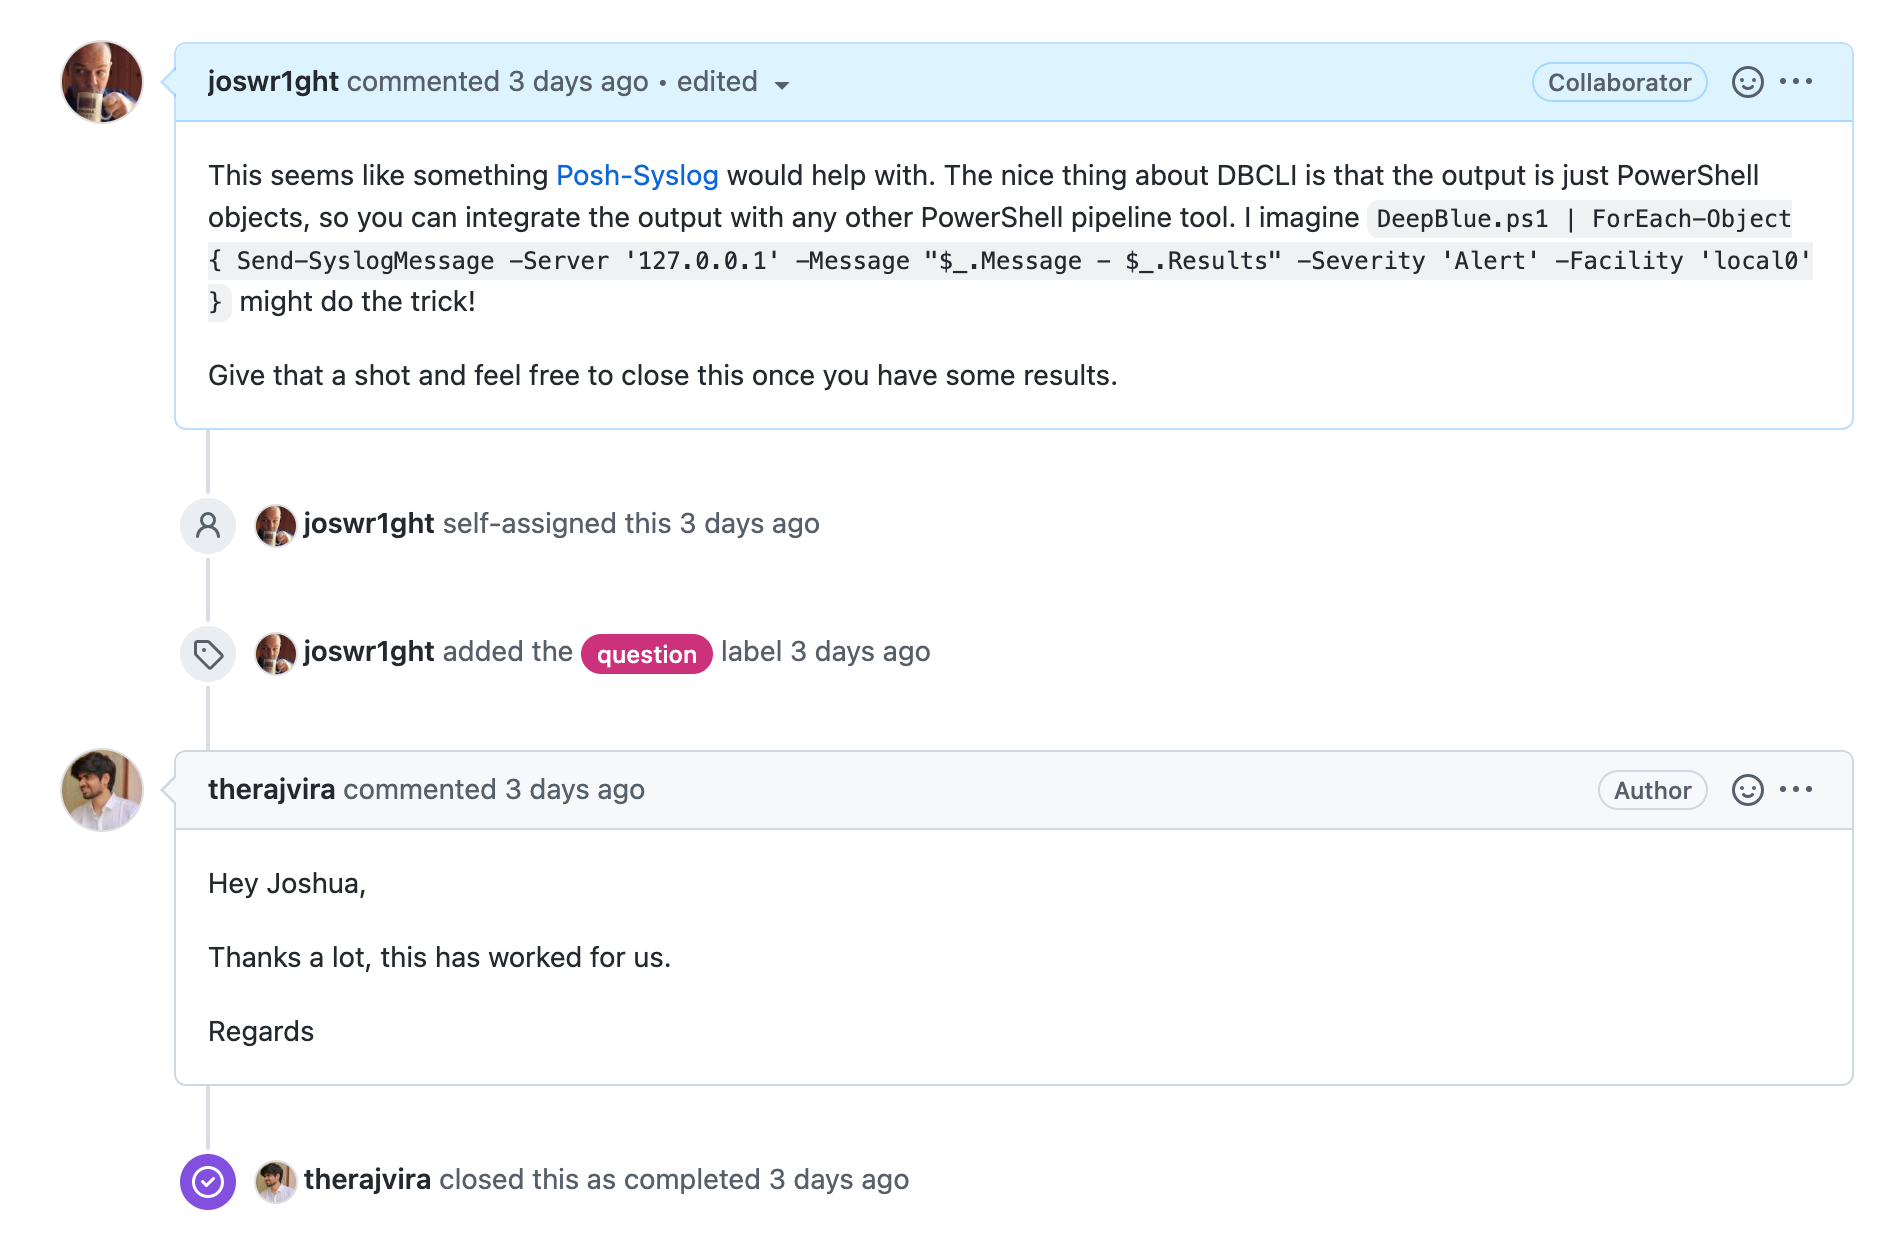 GitHub ticket response from Josh suggesting the use of Posh-SYSLOG as a solution to the question, followed by a thank you message and a ticket close status.